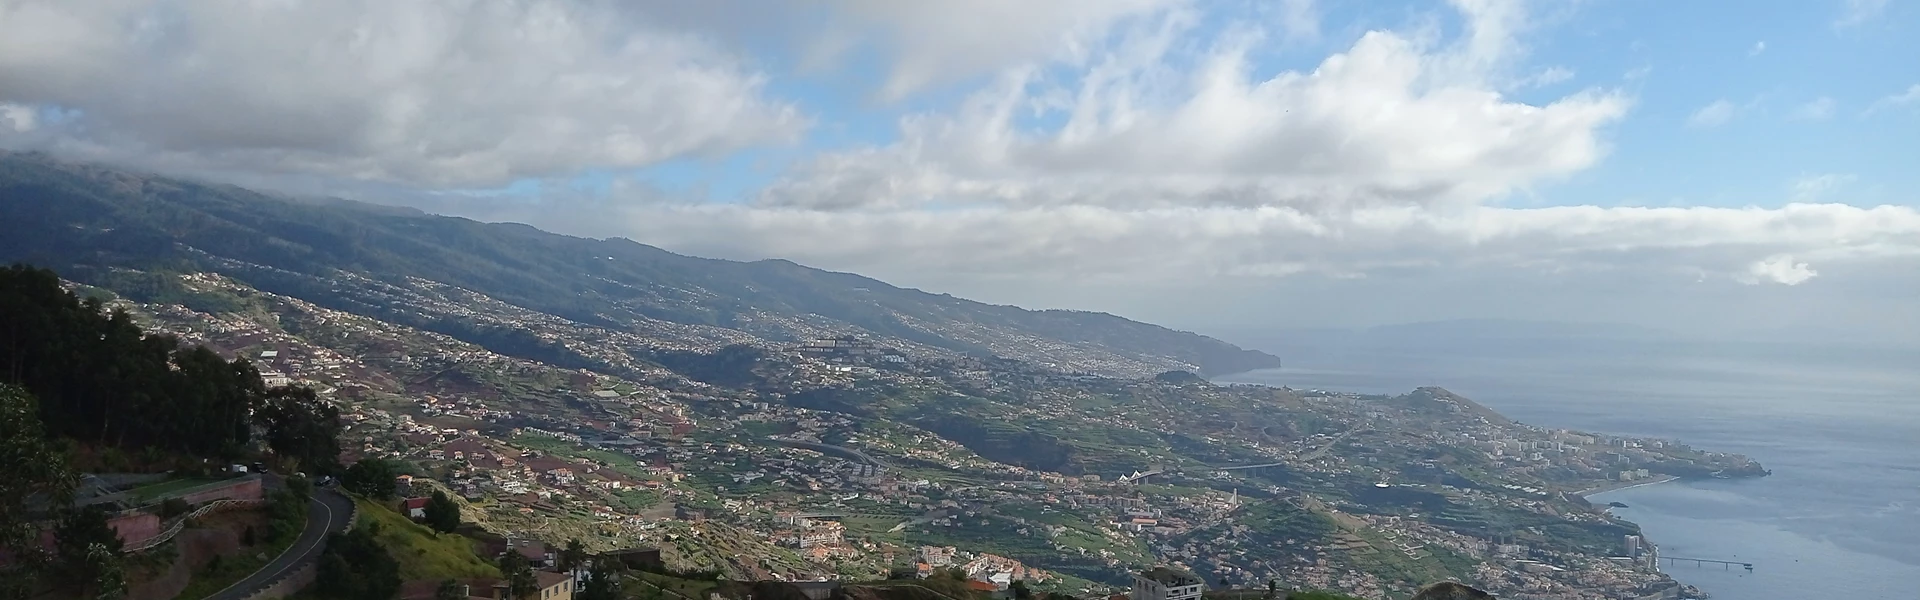 At Madeira Realty - Real Estate Agency in Funchal, Madeira